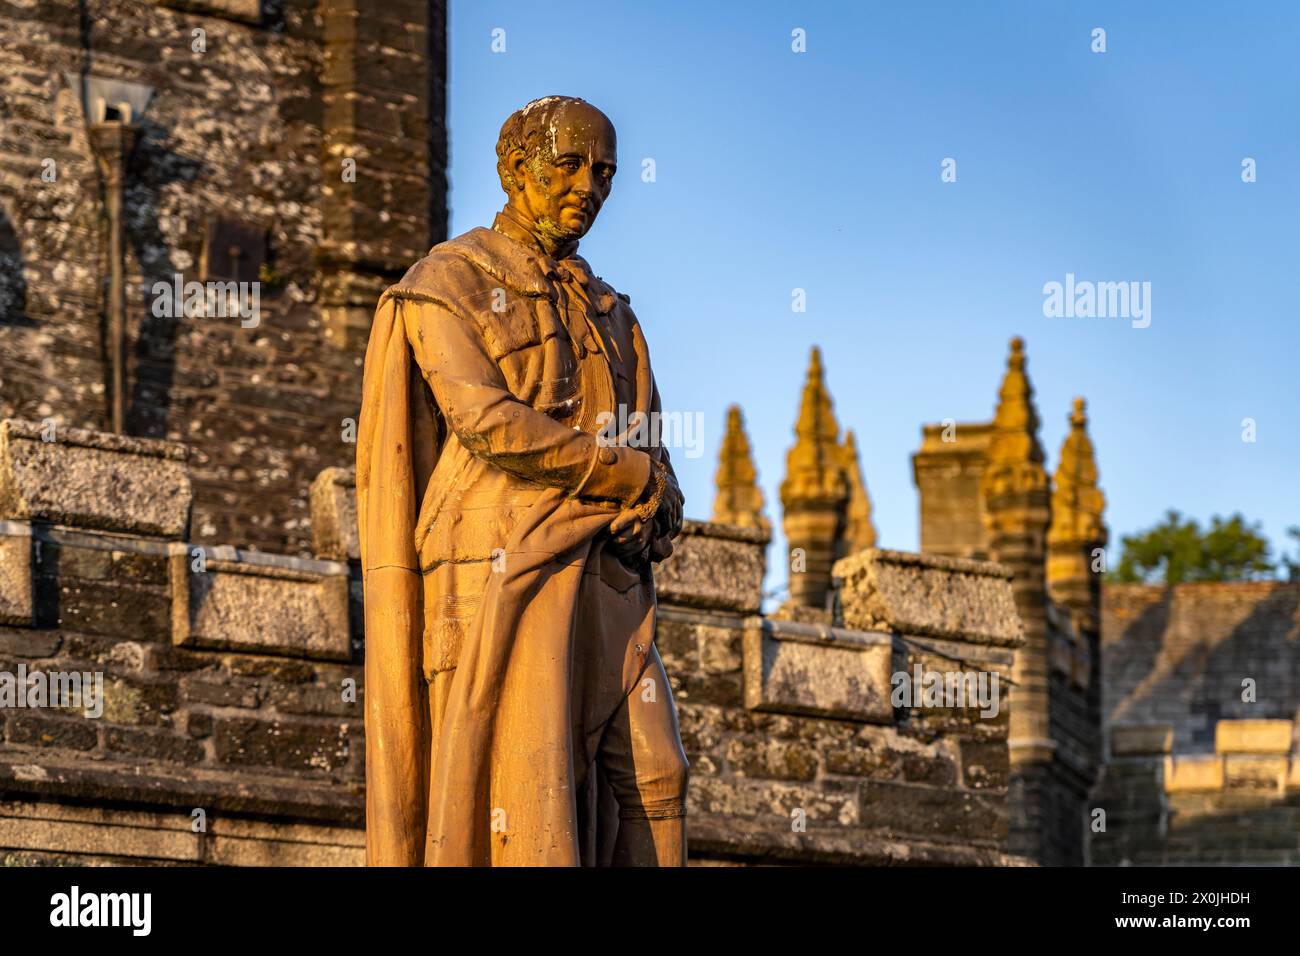 Statue of Francis, Duke of Bedford in front of the Town Hall - Town Hall in Tavistock, Devon, England, Great Britain, Europe Stock Photo